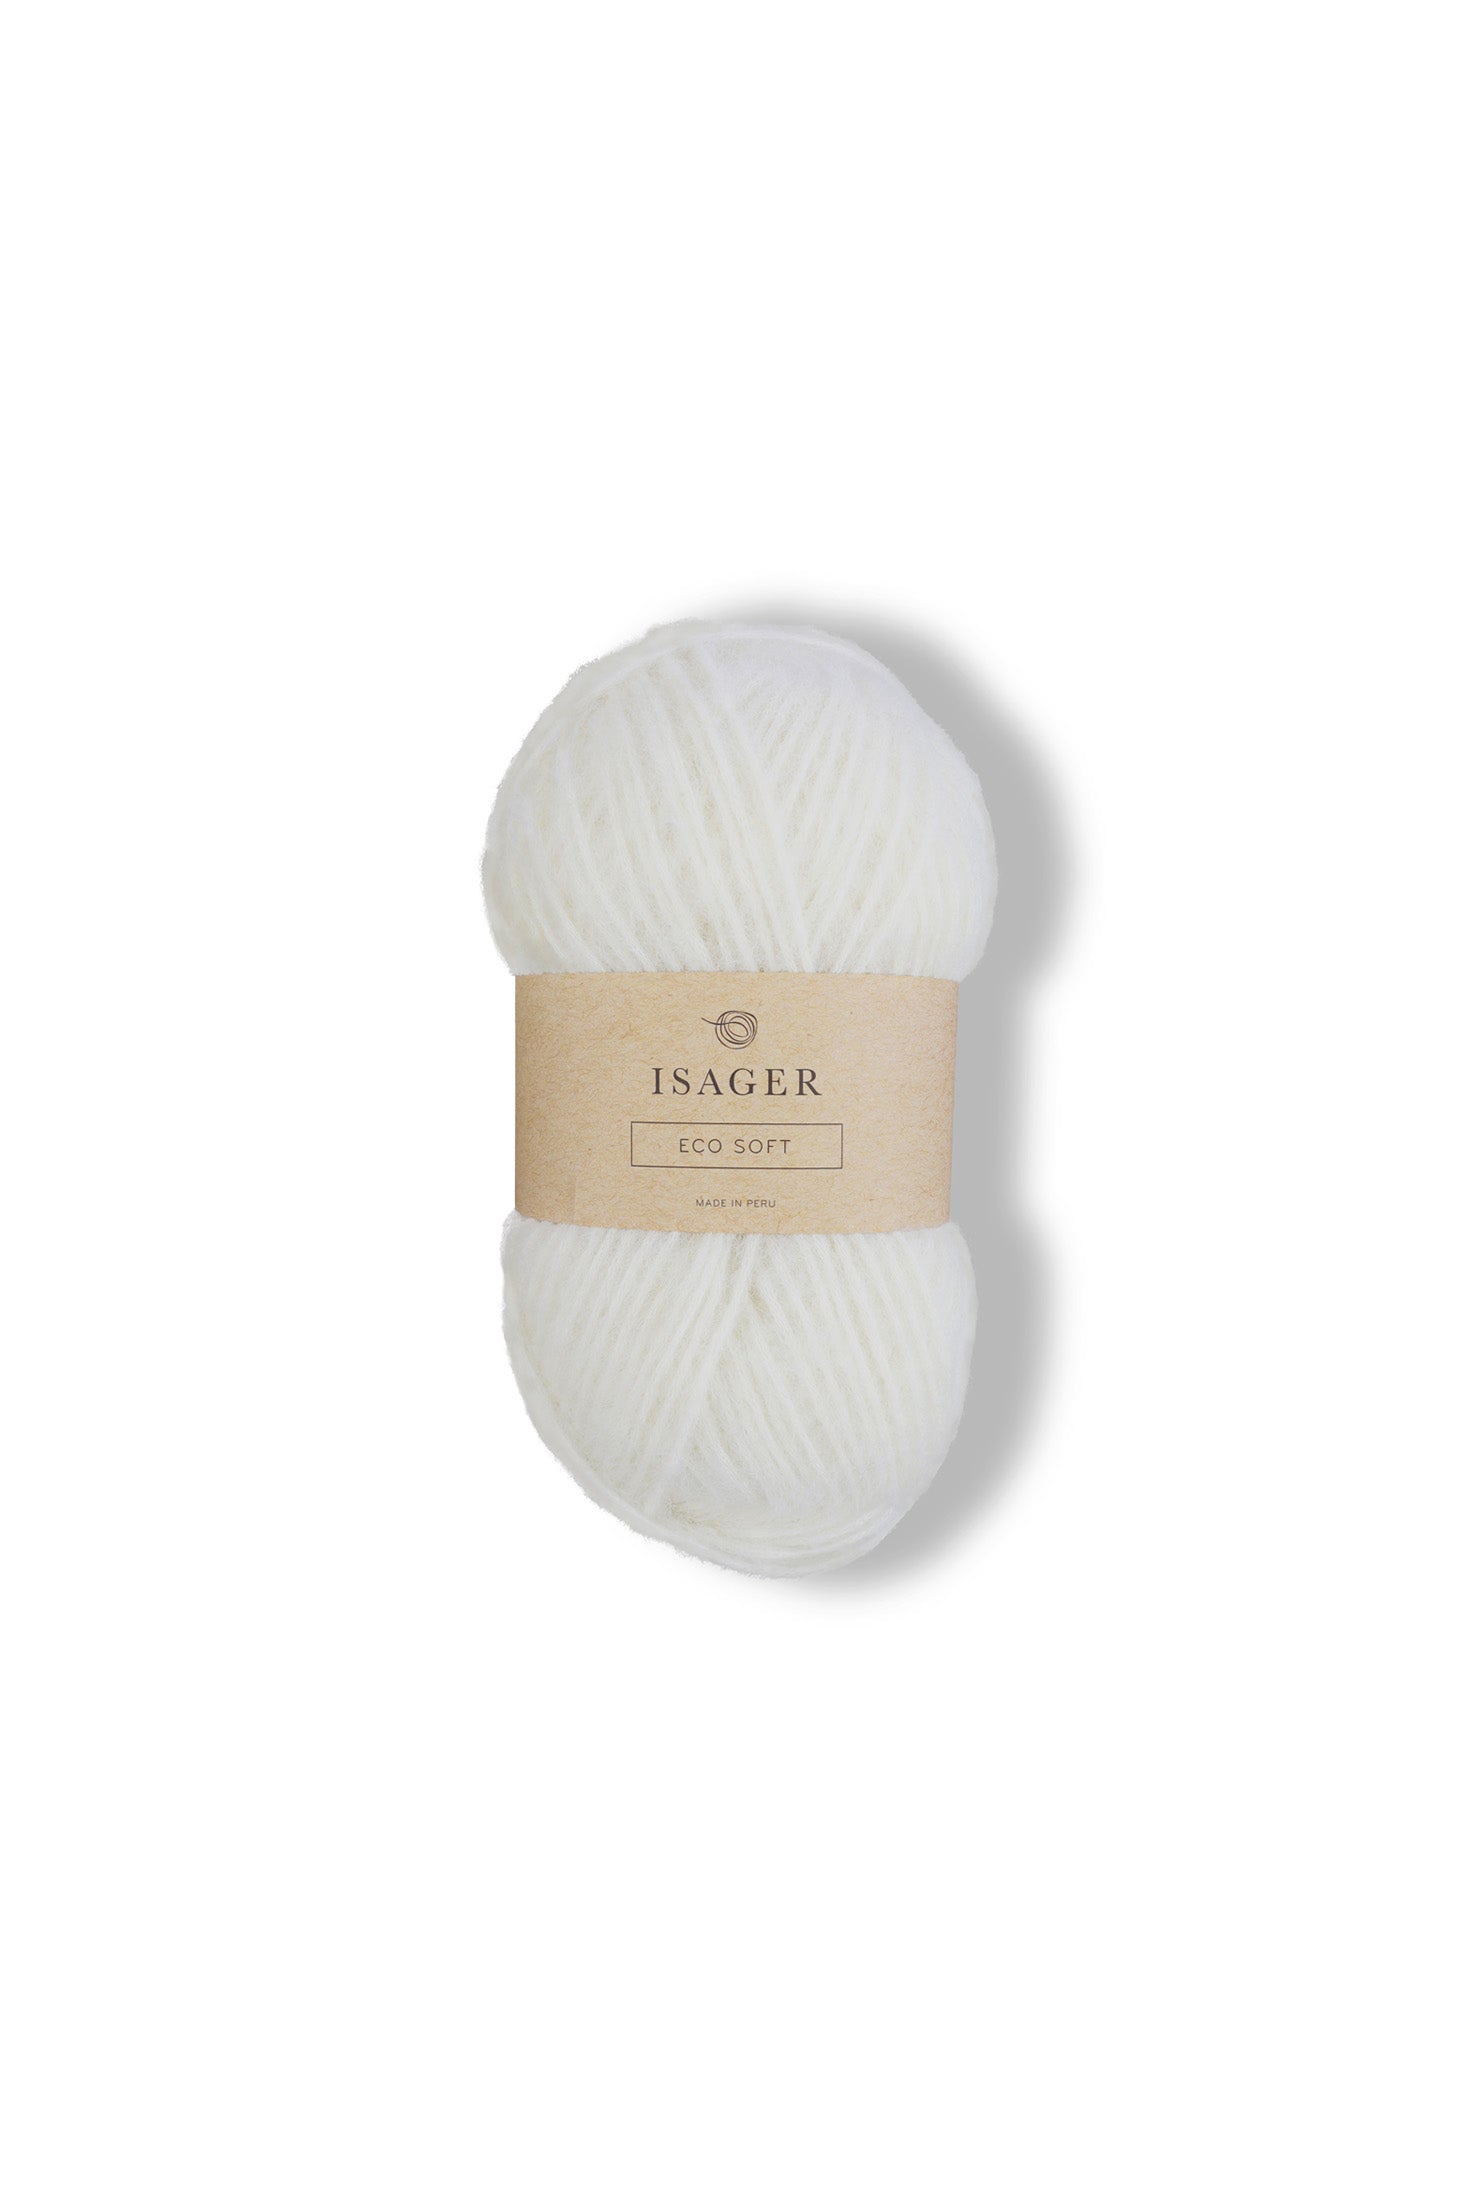 Isager ECO Soft 0